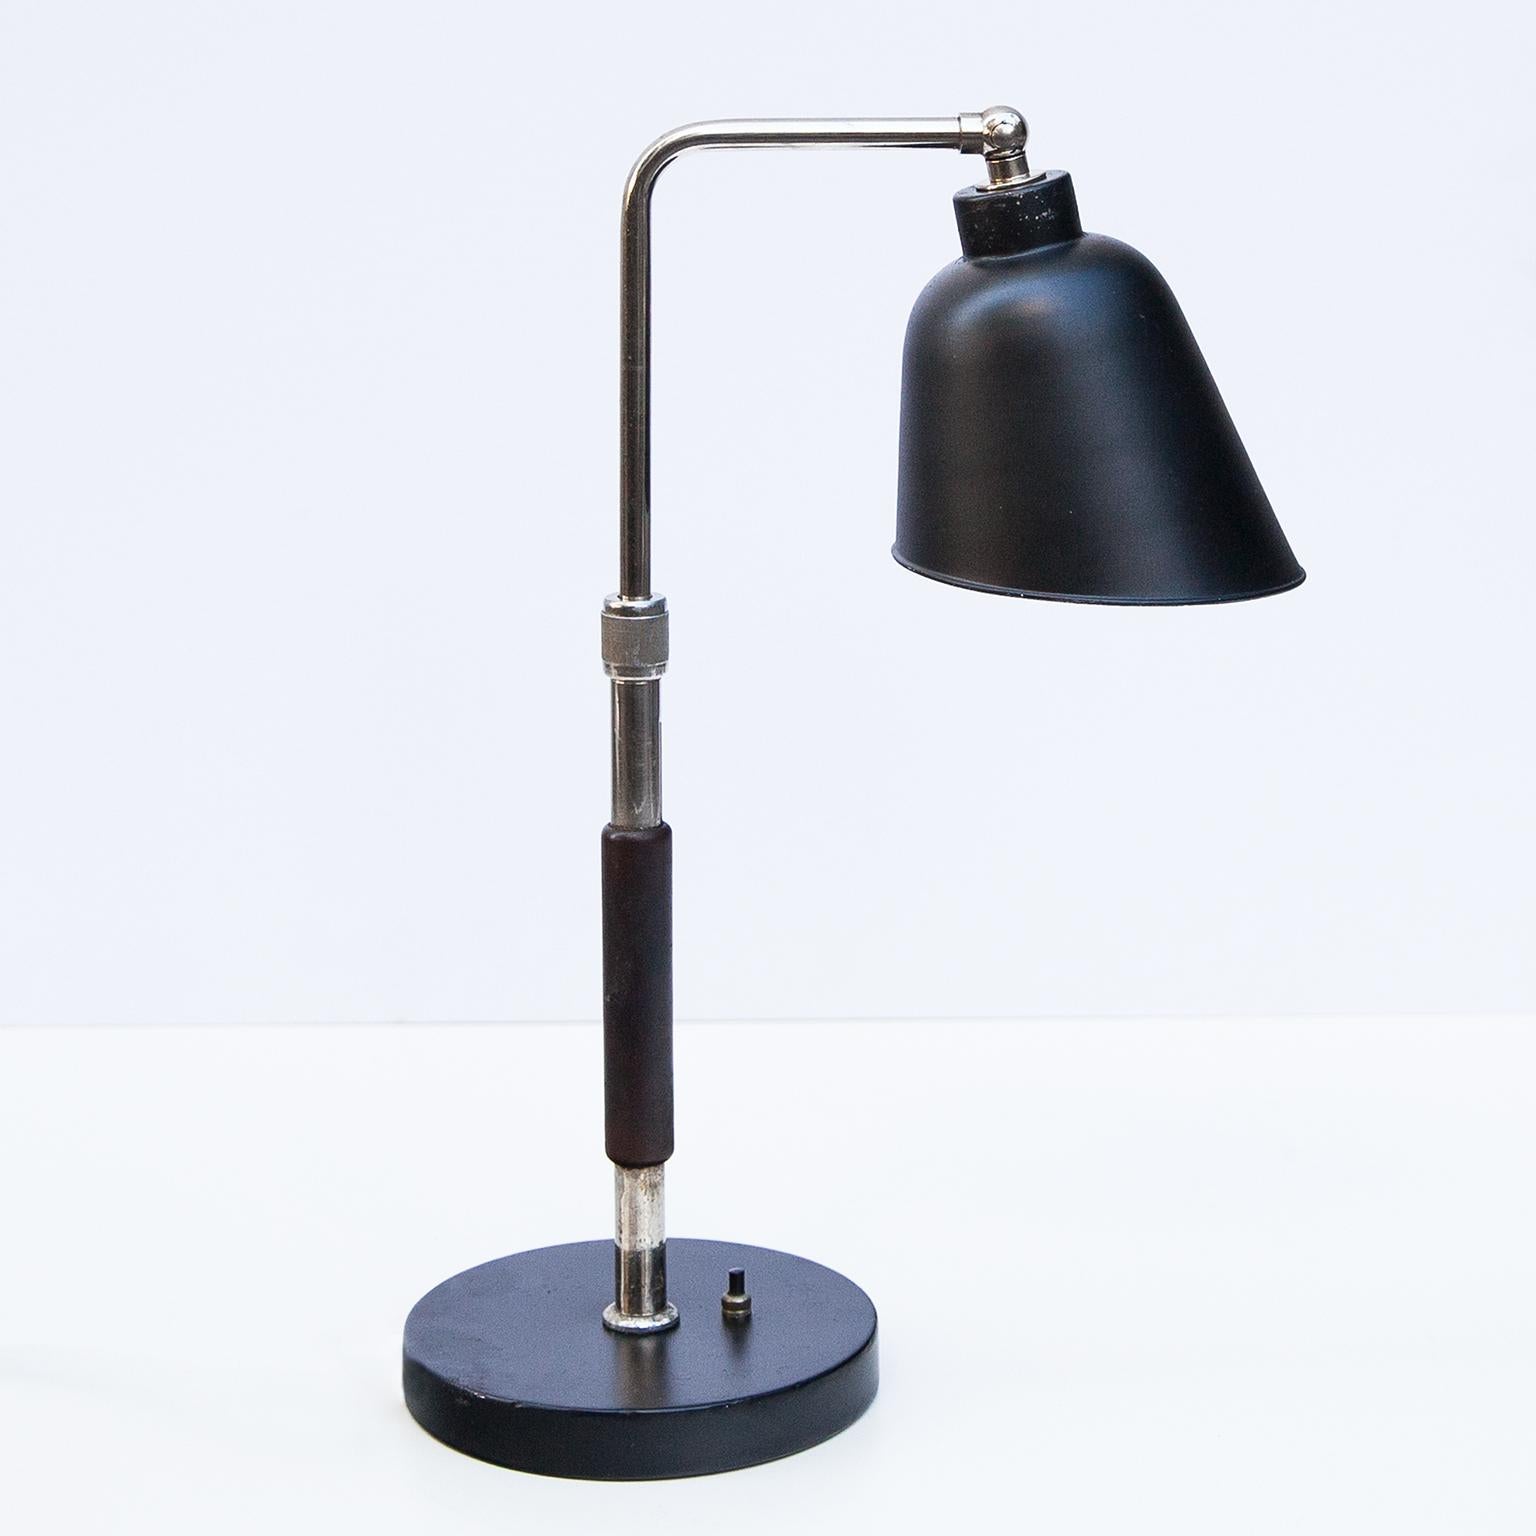 Rare Christian Dell table lamp model no. 6607, manufactured by Gebrüder Kaiser & Co., Neheim-Hüsten, Germany 1930s. Executed in black painted wood, lacquered metal, chrome-plated metal, the black painted shade.
Literature: Der Arbeit zu Nutz’ – den